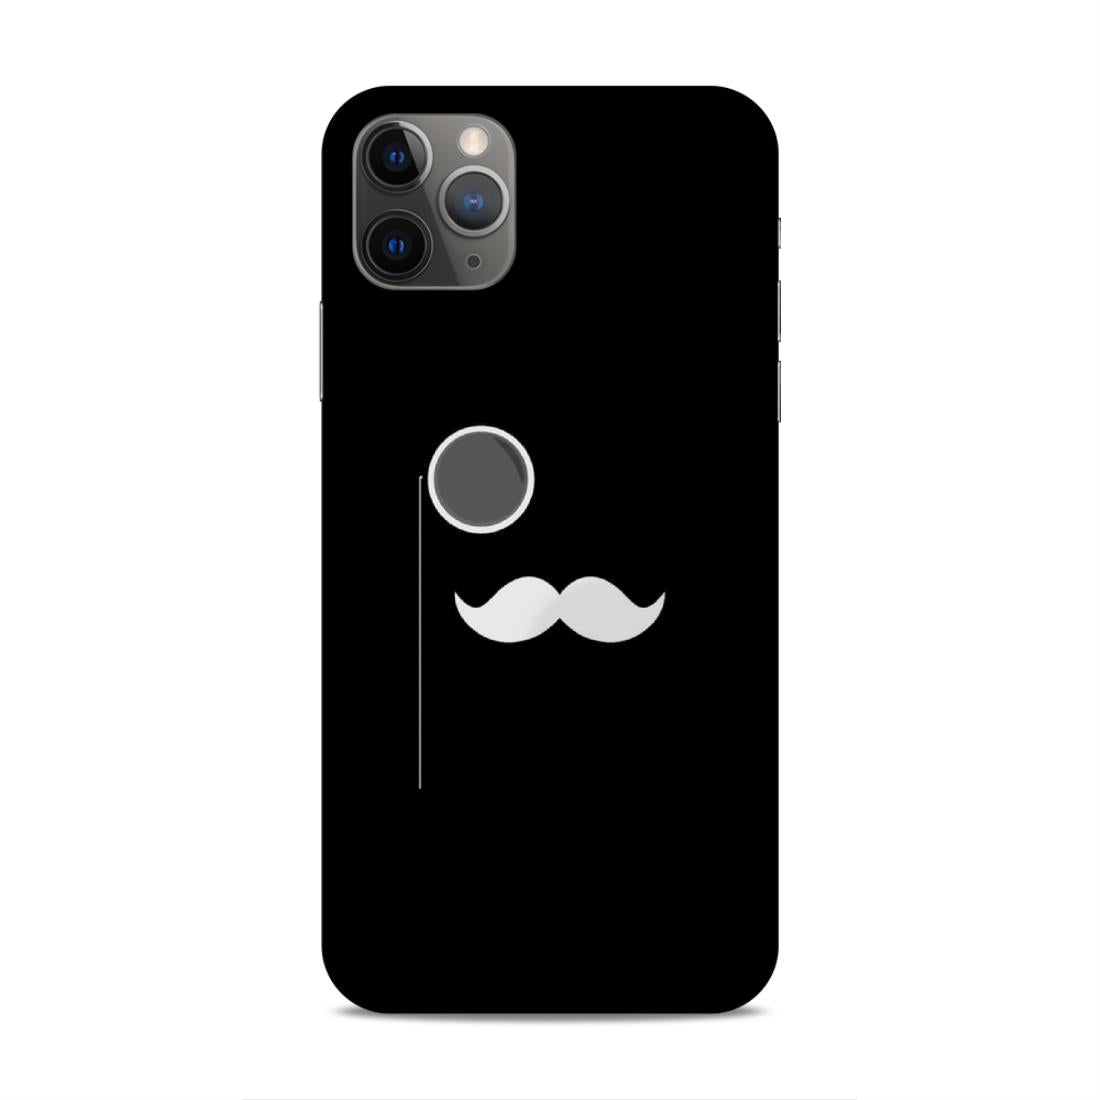 Spect and Mustache Hard Back Case For Apple iPhone 11 Pro Max